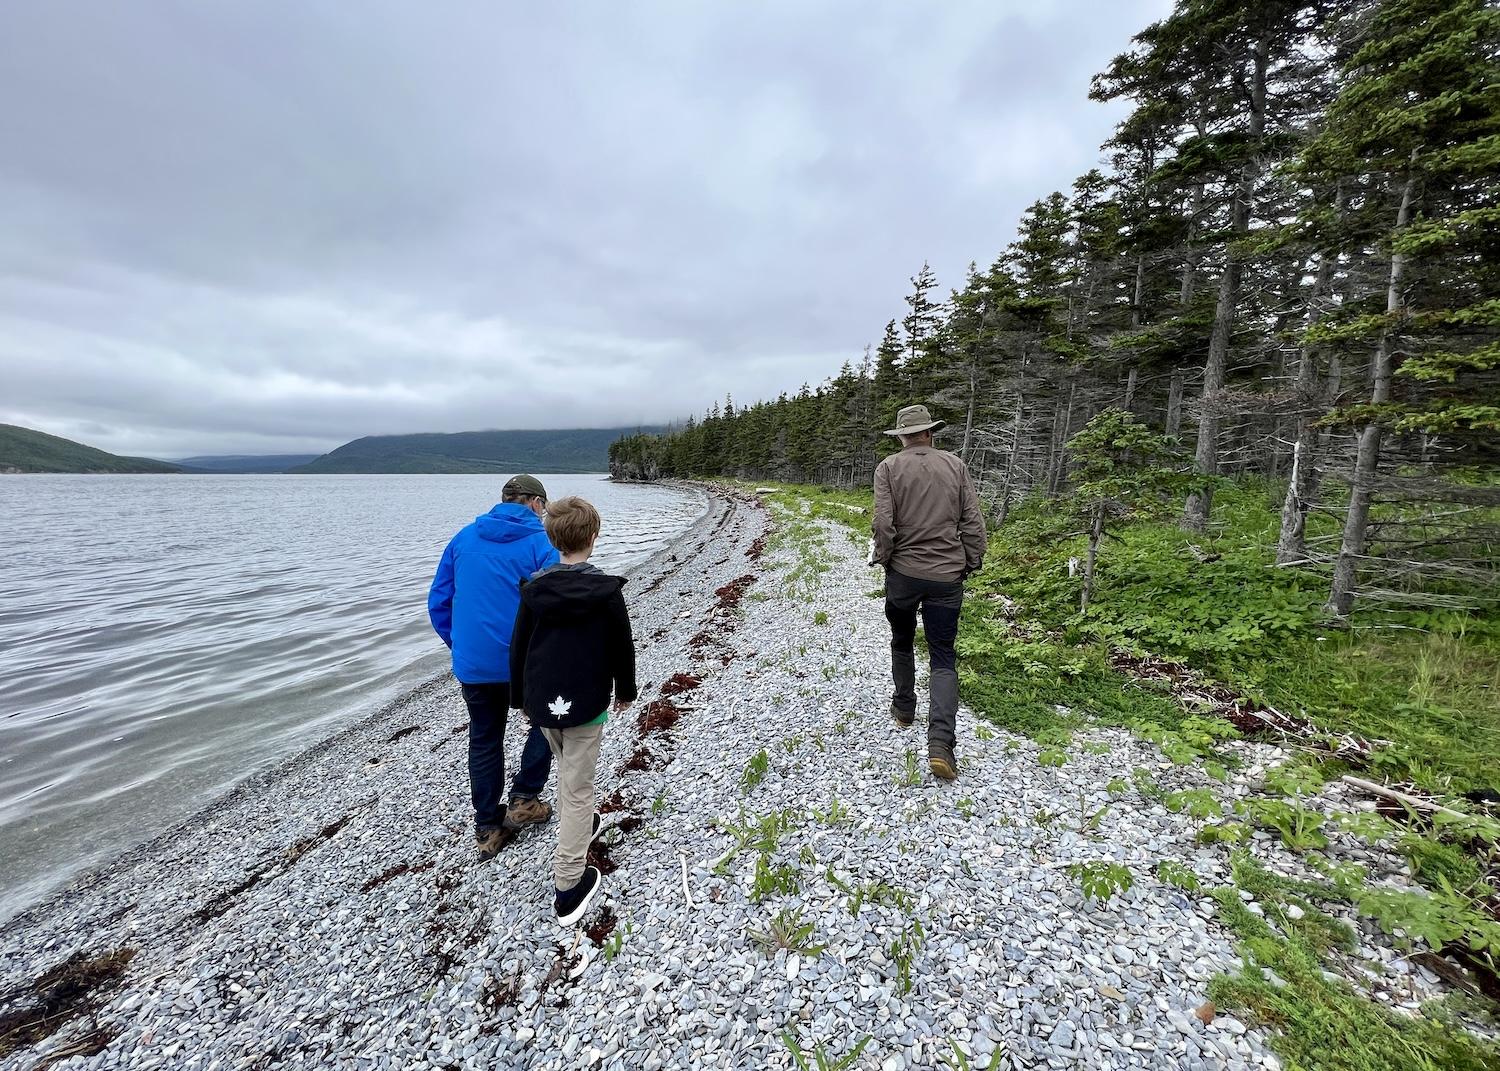 Gros Morne Adventures guide Keith Payne leads Discover Mekapisk guests on a beach walk.